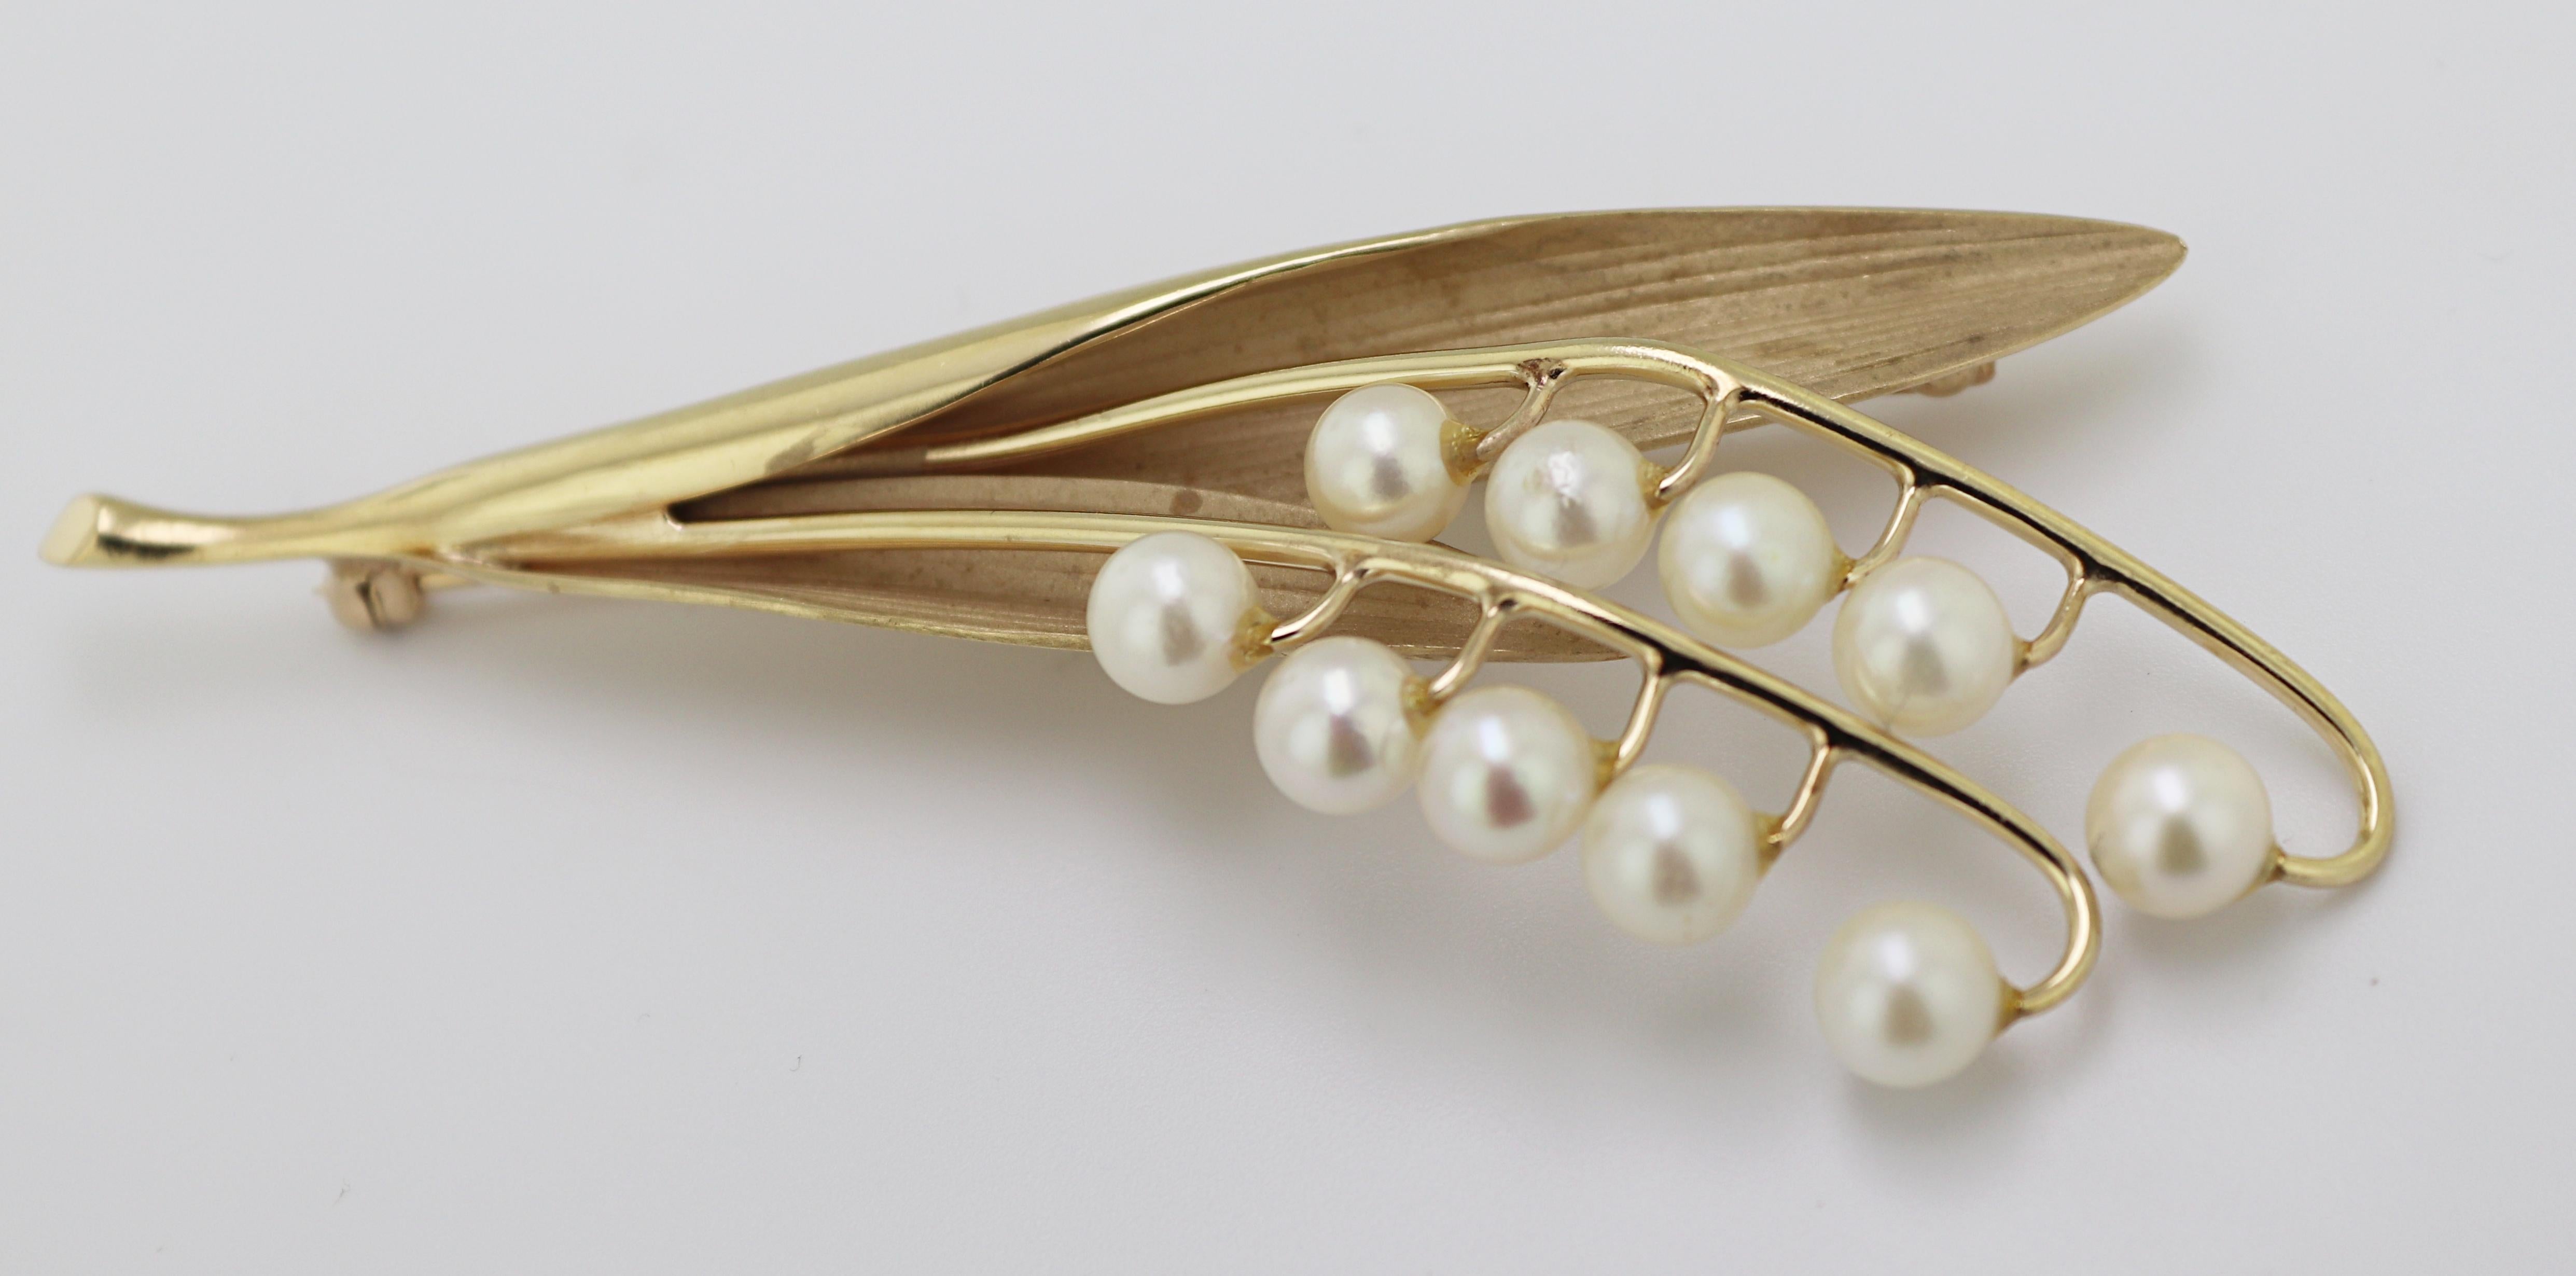 Designed a Lilly of the Valley, featuring (10) 5.5 mm cultured pearl flowers,
set in 14k yellow gold stem and leaves, 78.6 X 32 X 8.0 mm, marked CK
14K, Gross Weight: 12.54 grams.